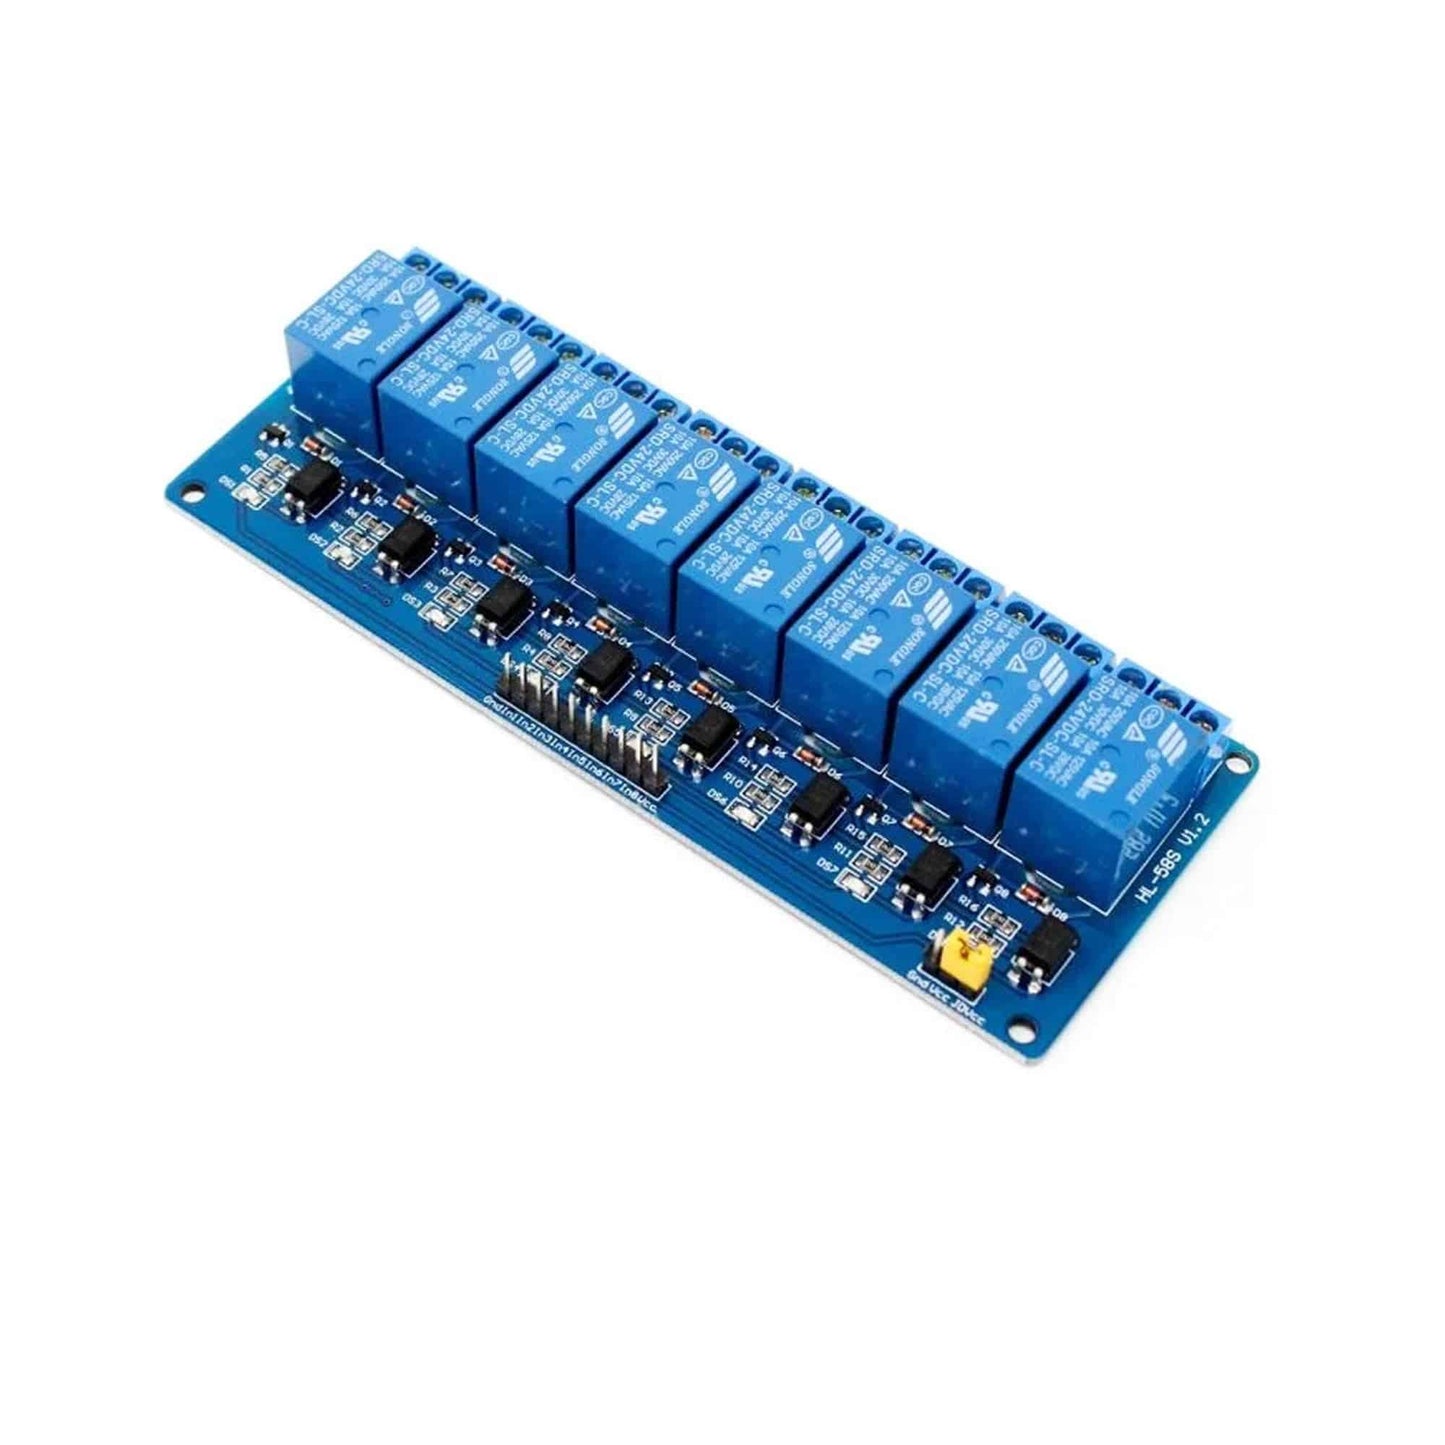 24V 8 Channel Relay Module with Optocoupler